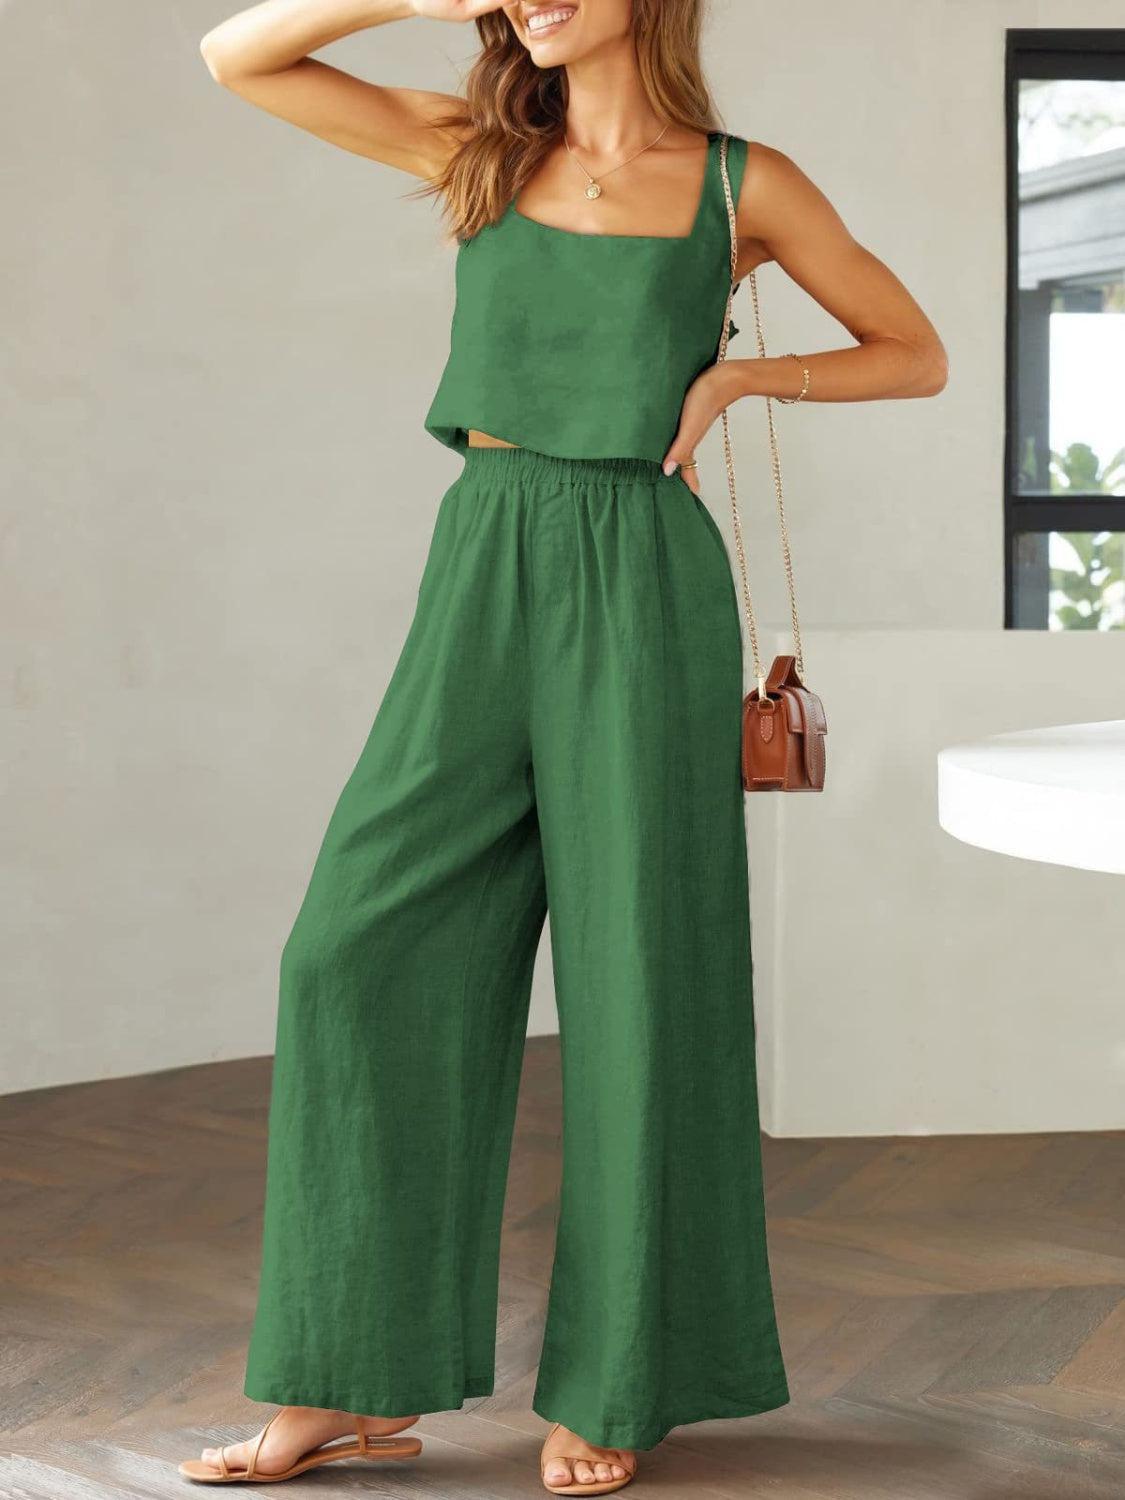 a woman in a green jumpsuit posing for the camera